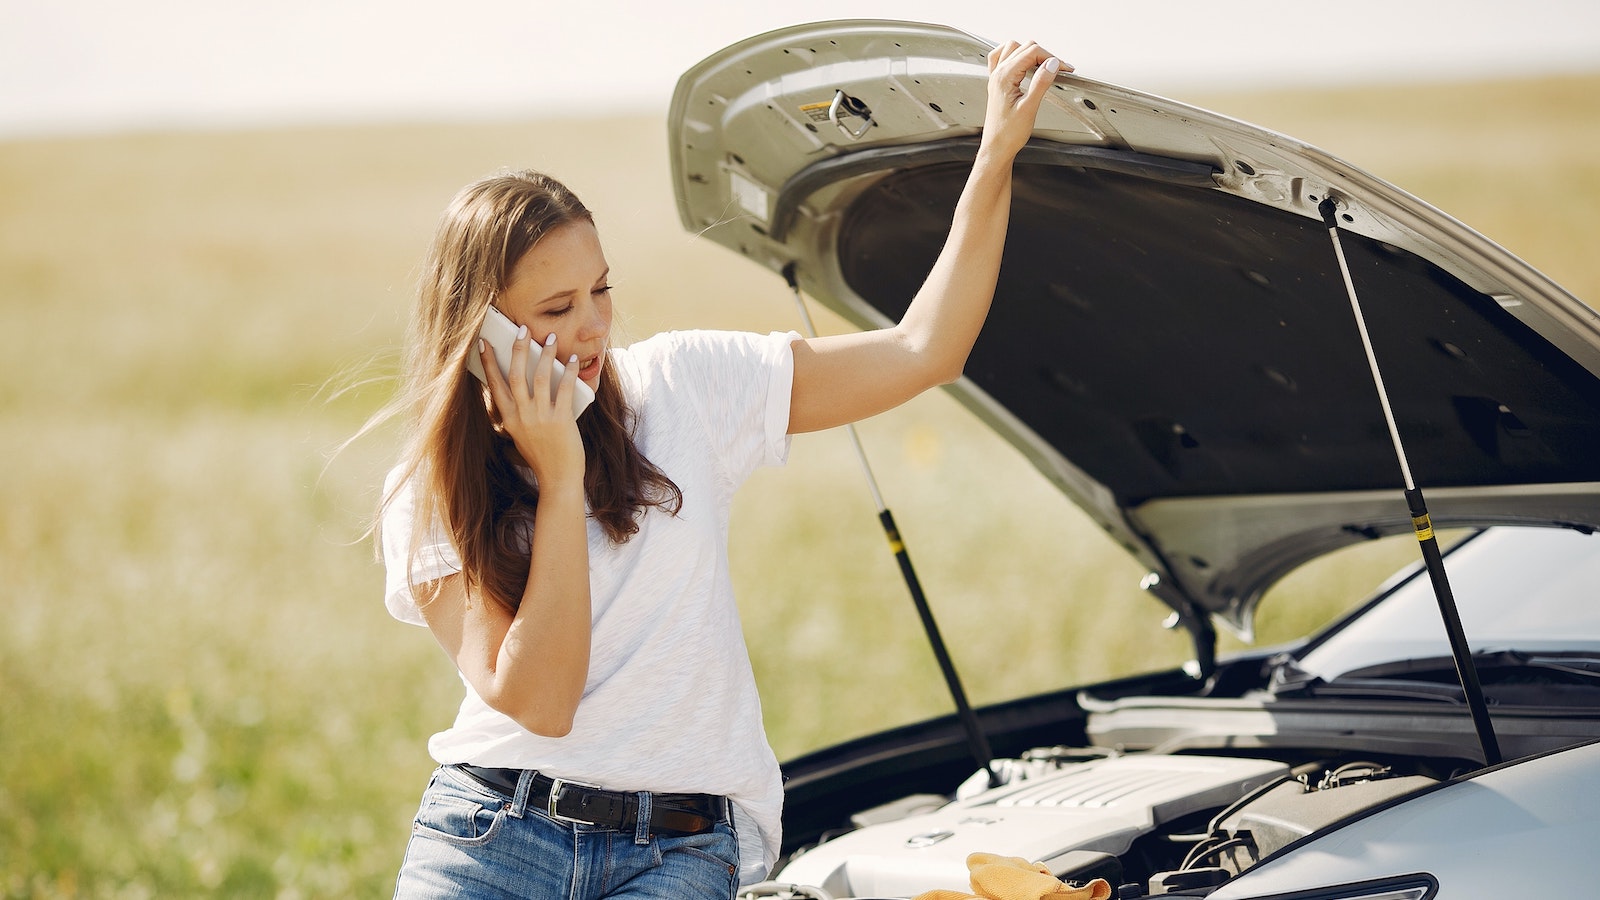 Woman calling on the phone next to the open hood of a car